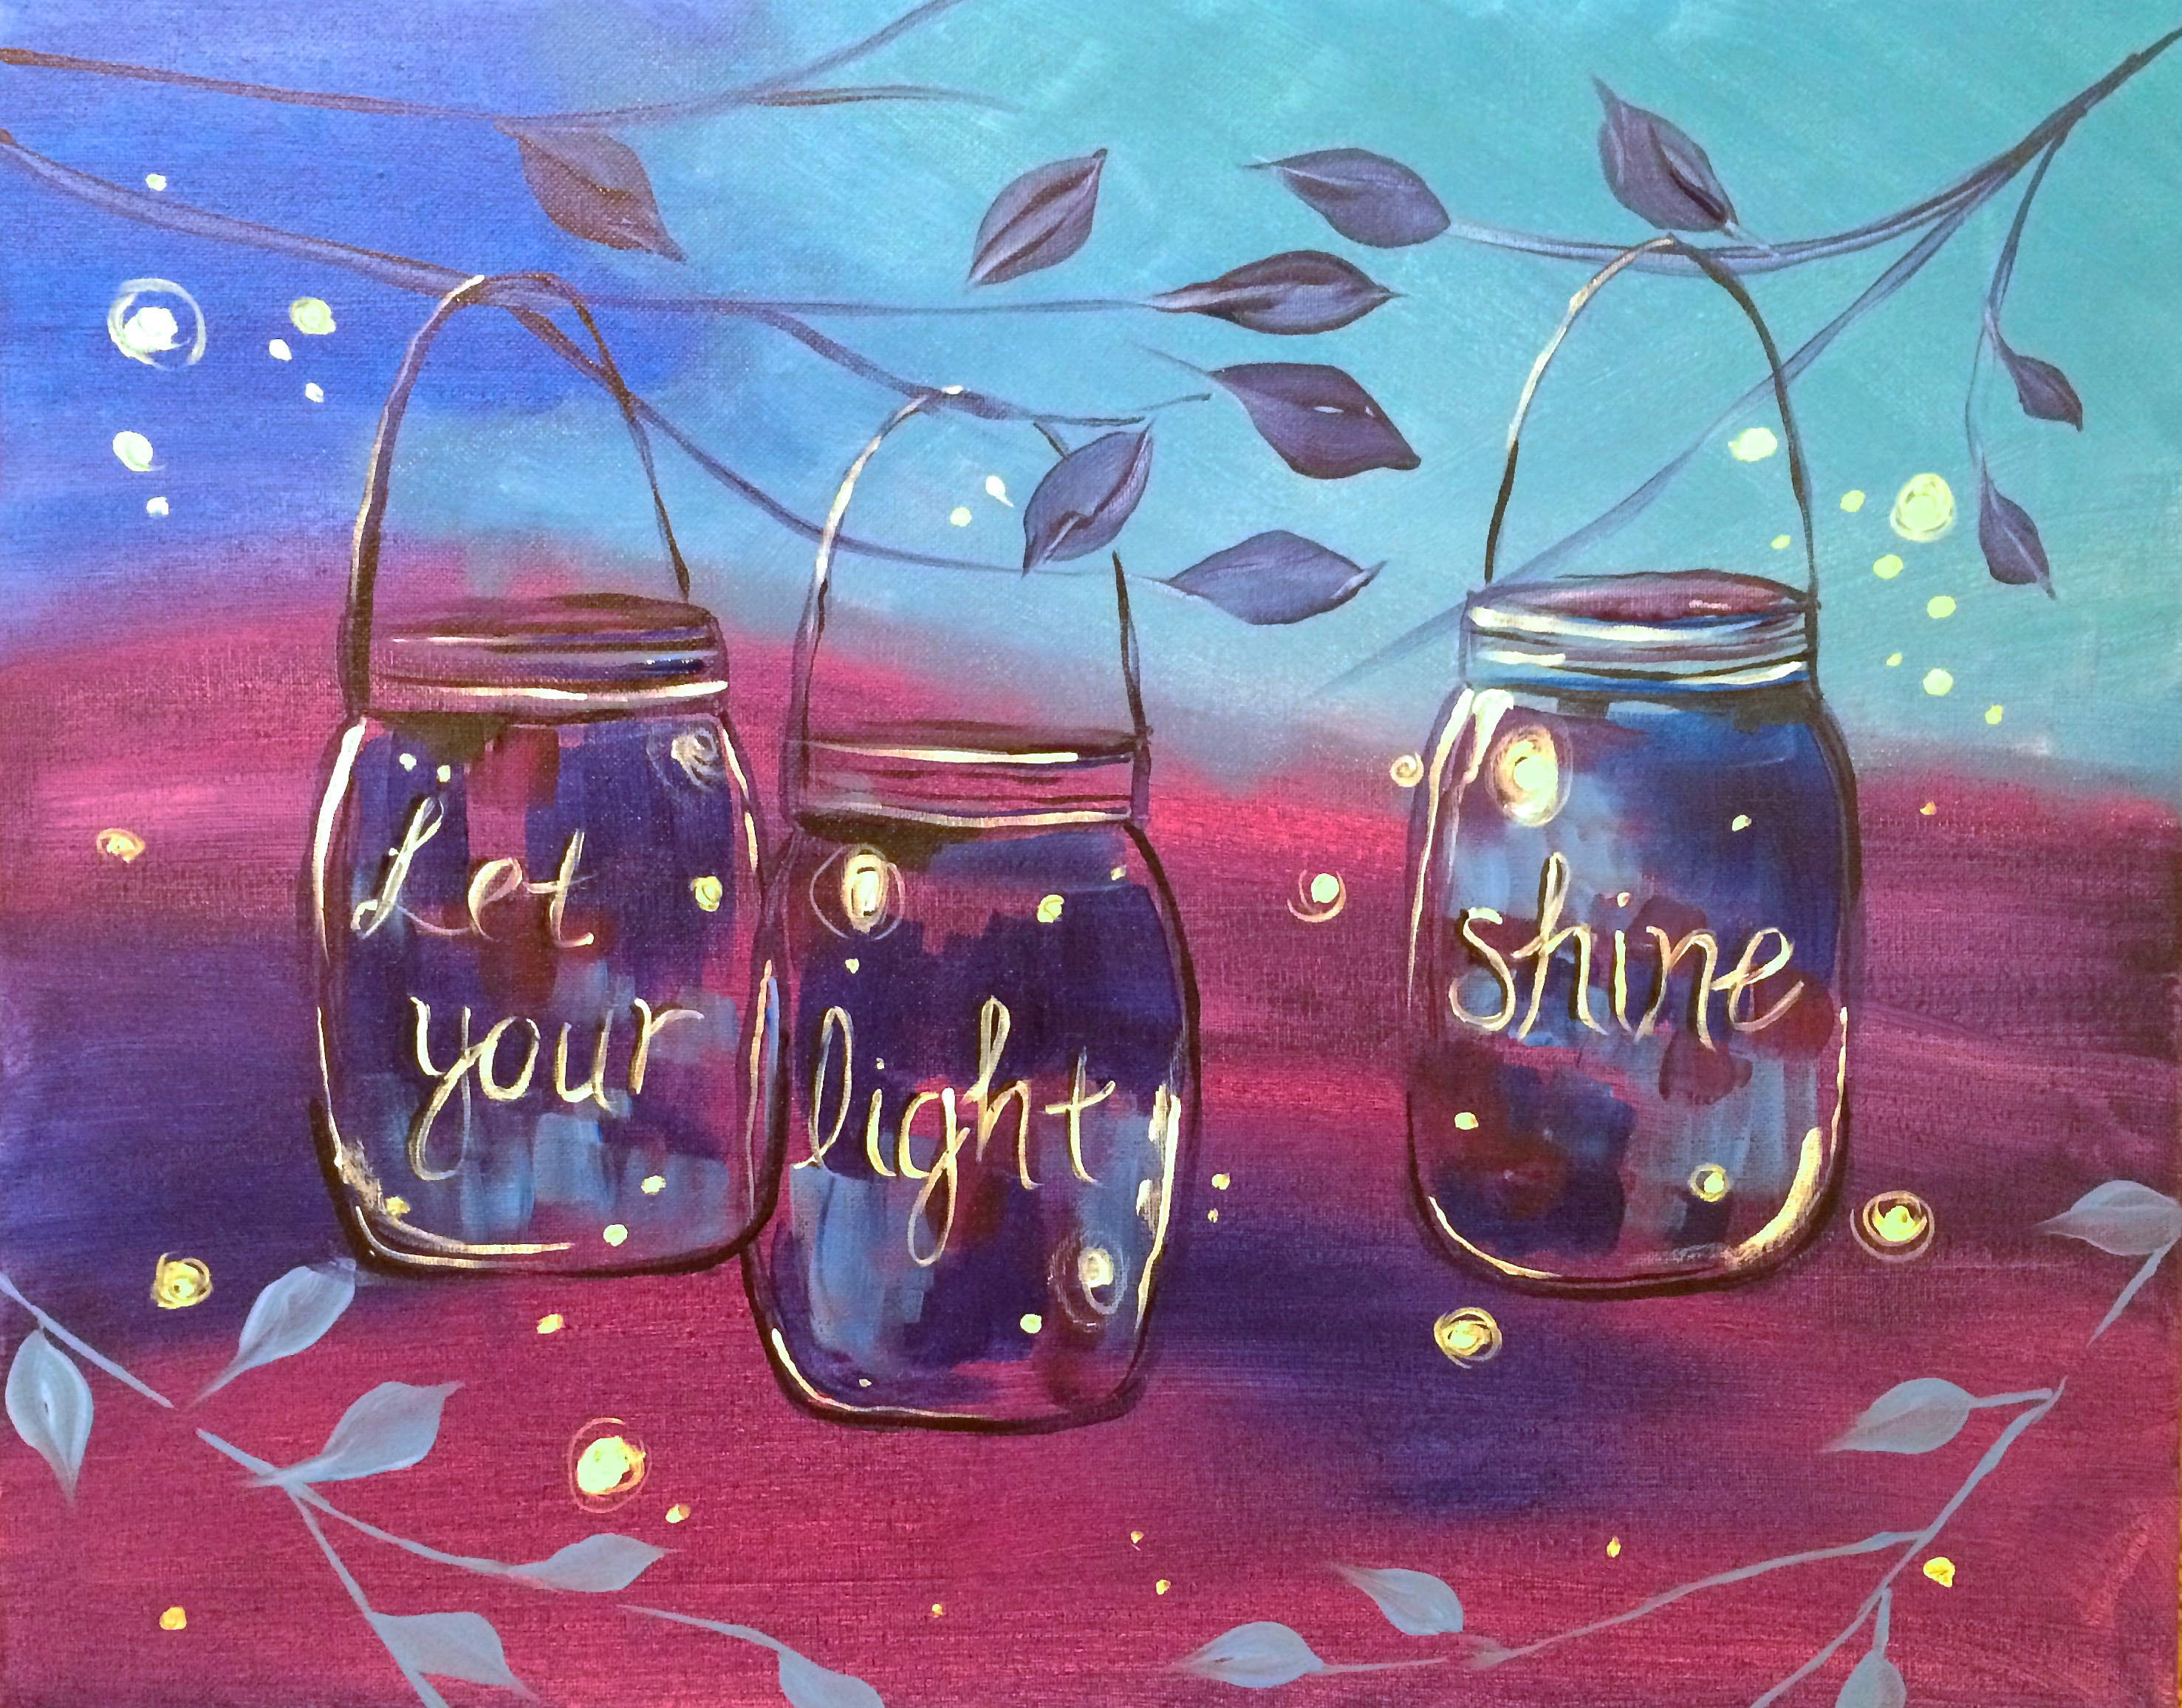 A Let Your Light Shine paint nite project by Yaymaker